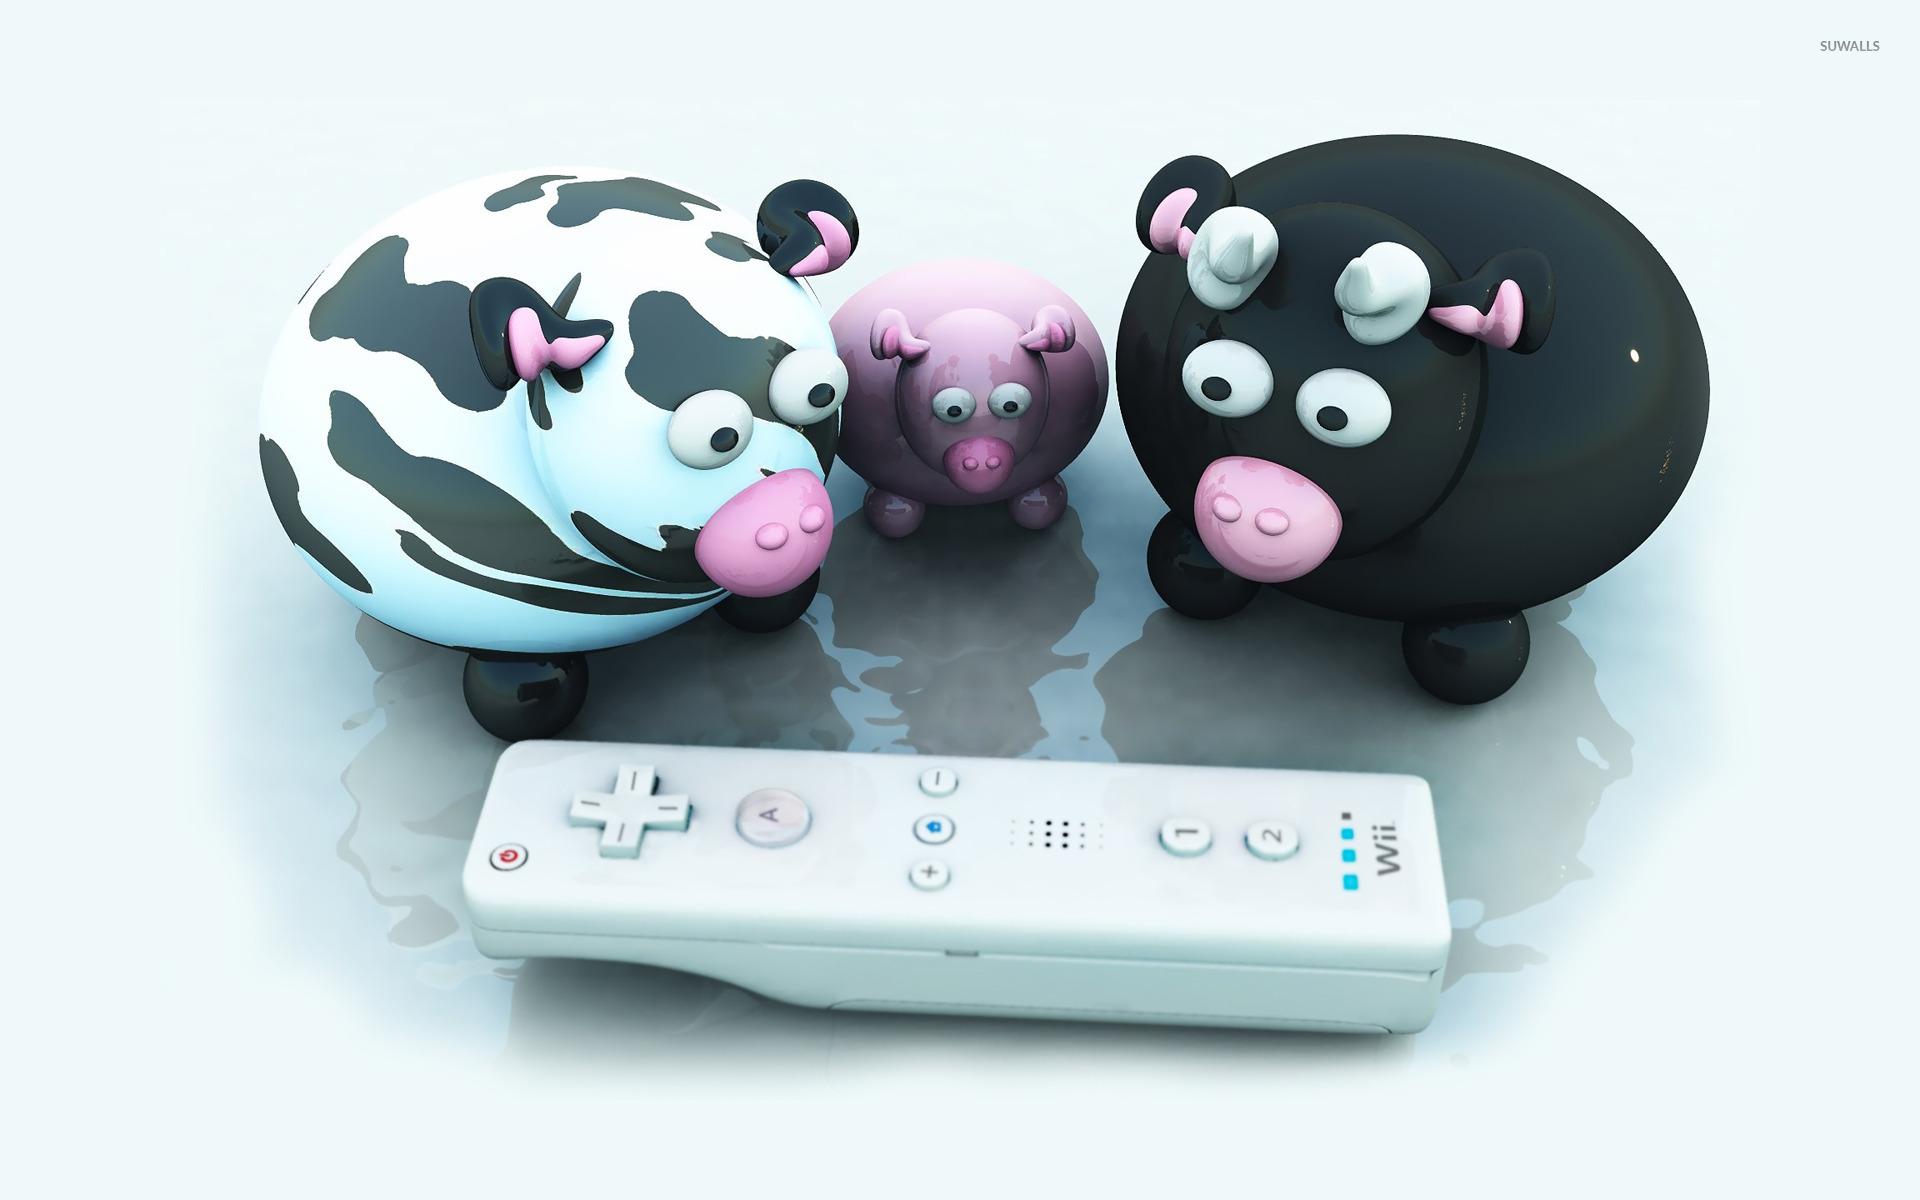 Cows looking at a Wii controller wallpaper wallpaper